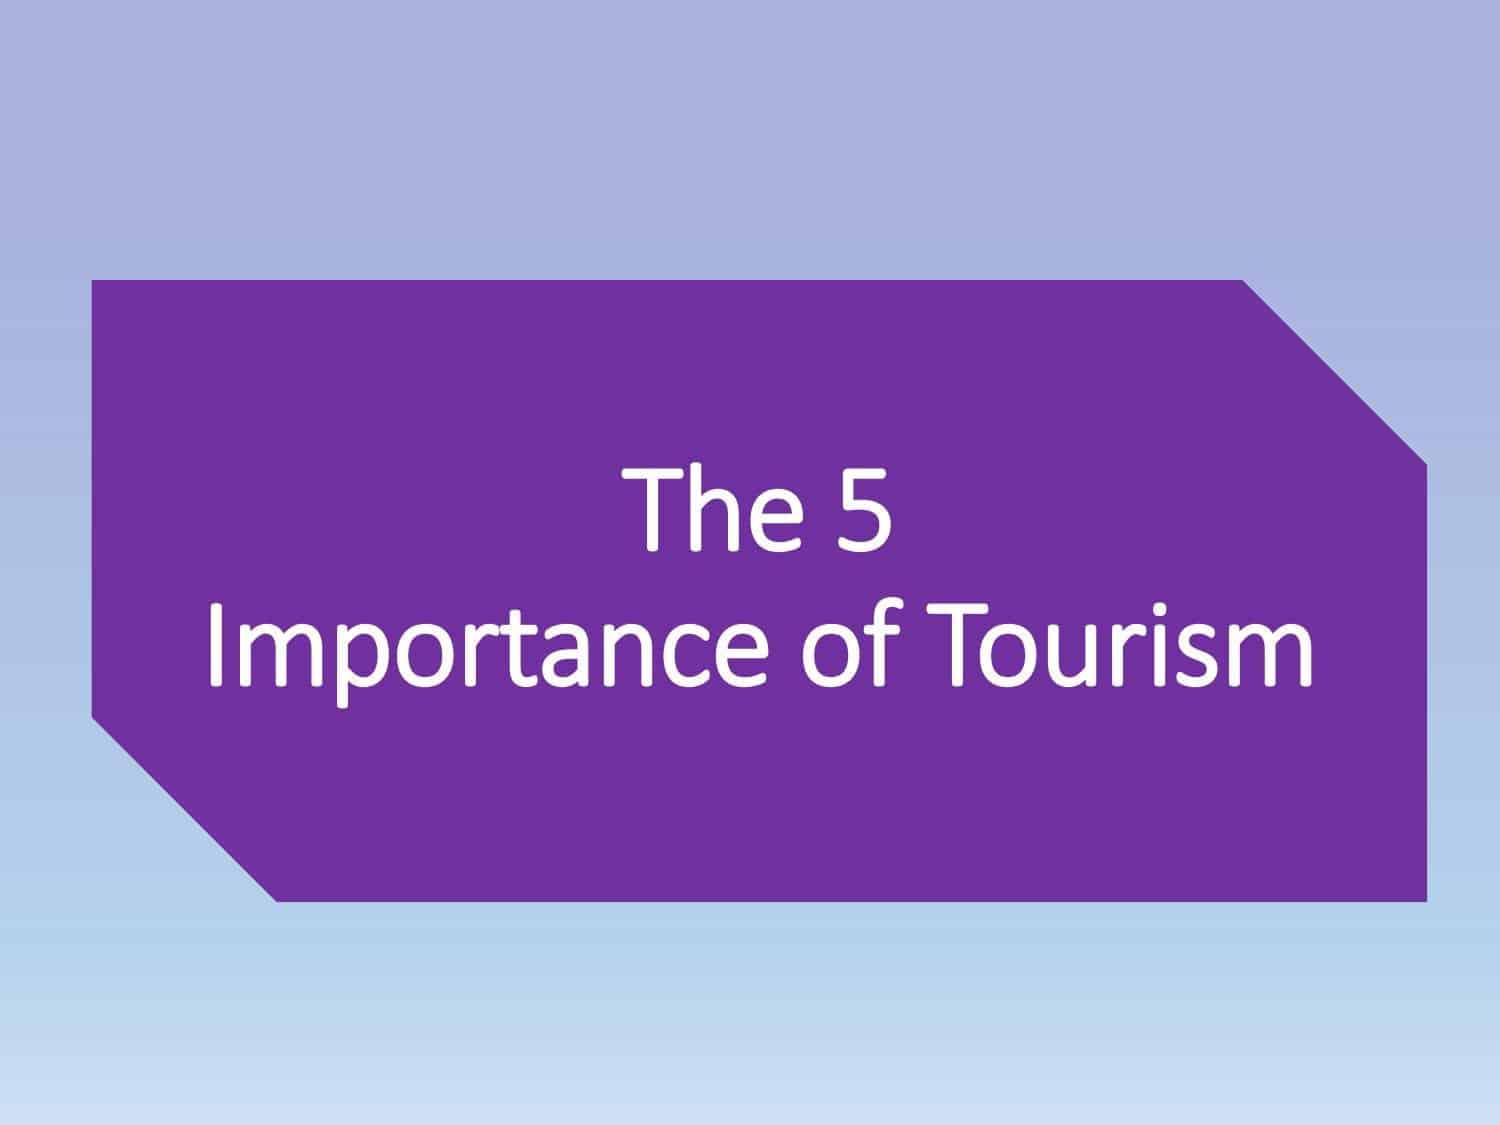 What is the importance of tourism?